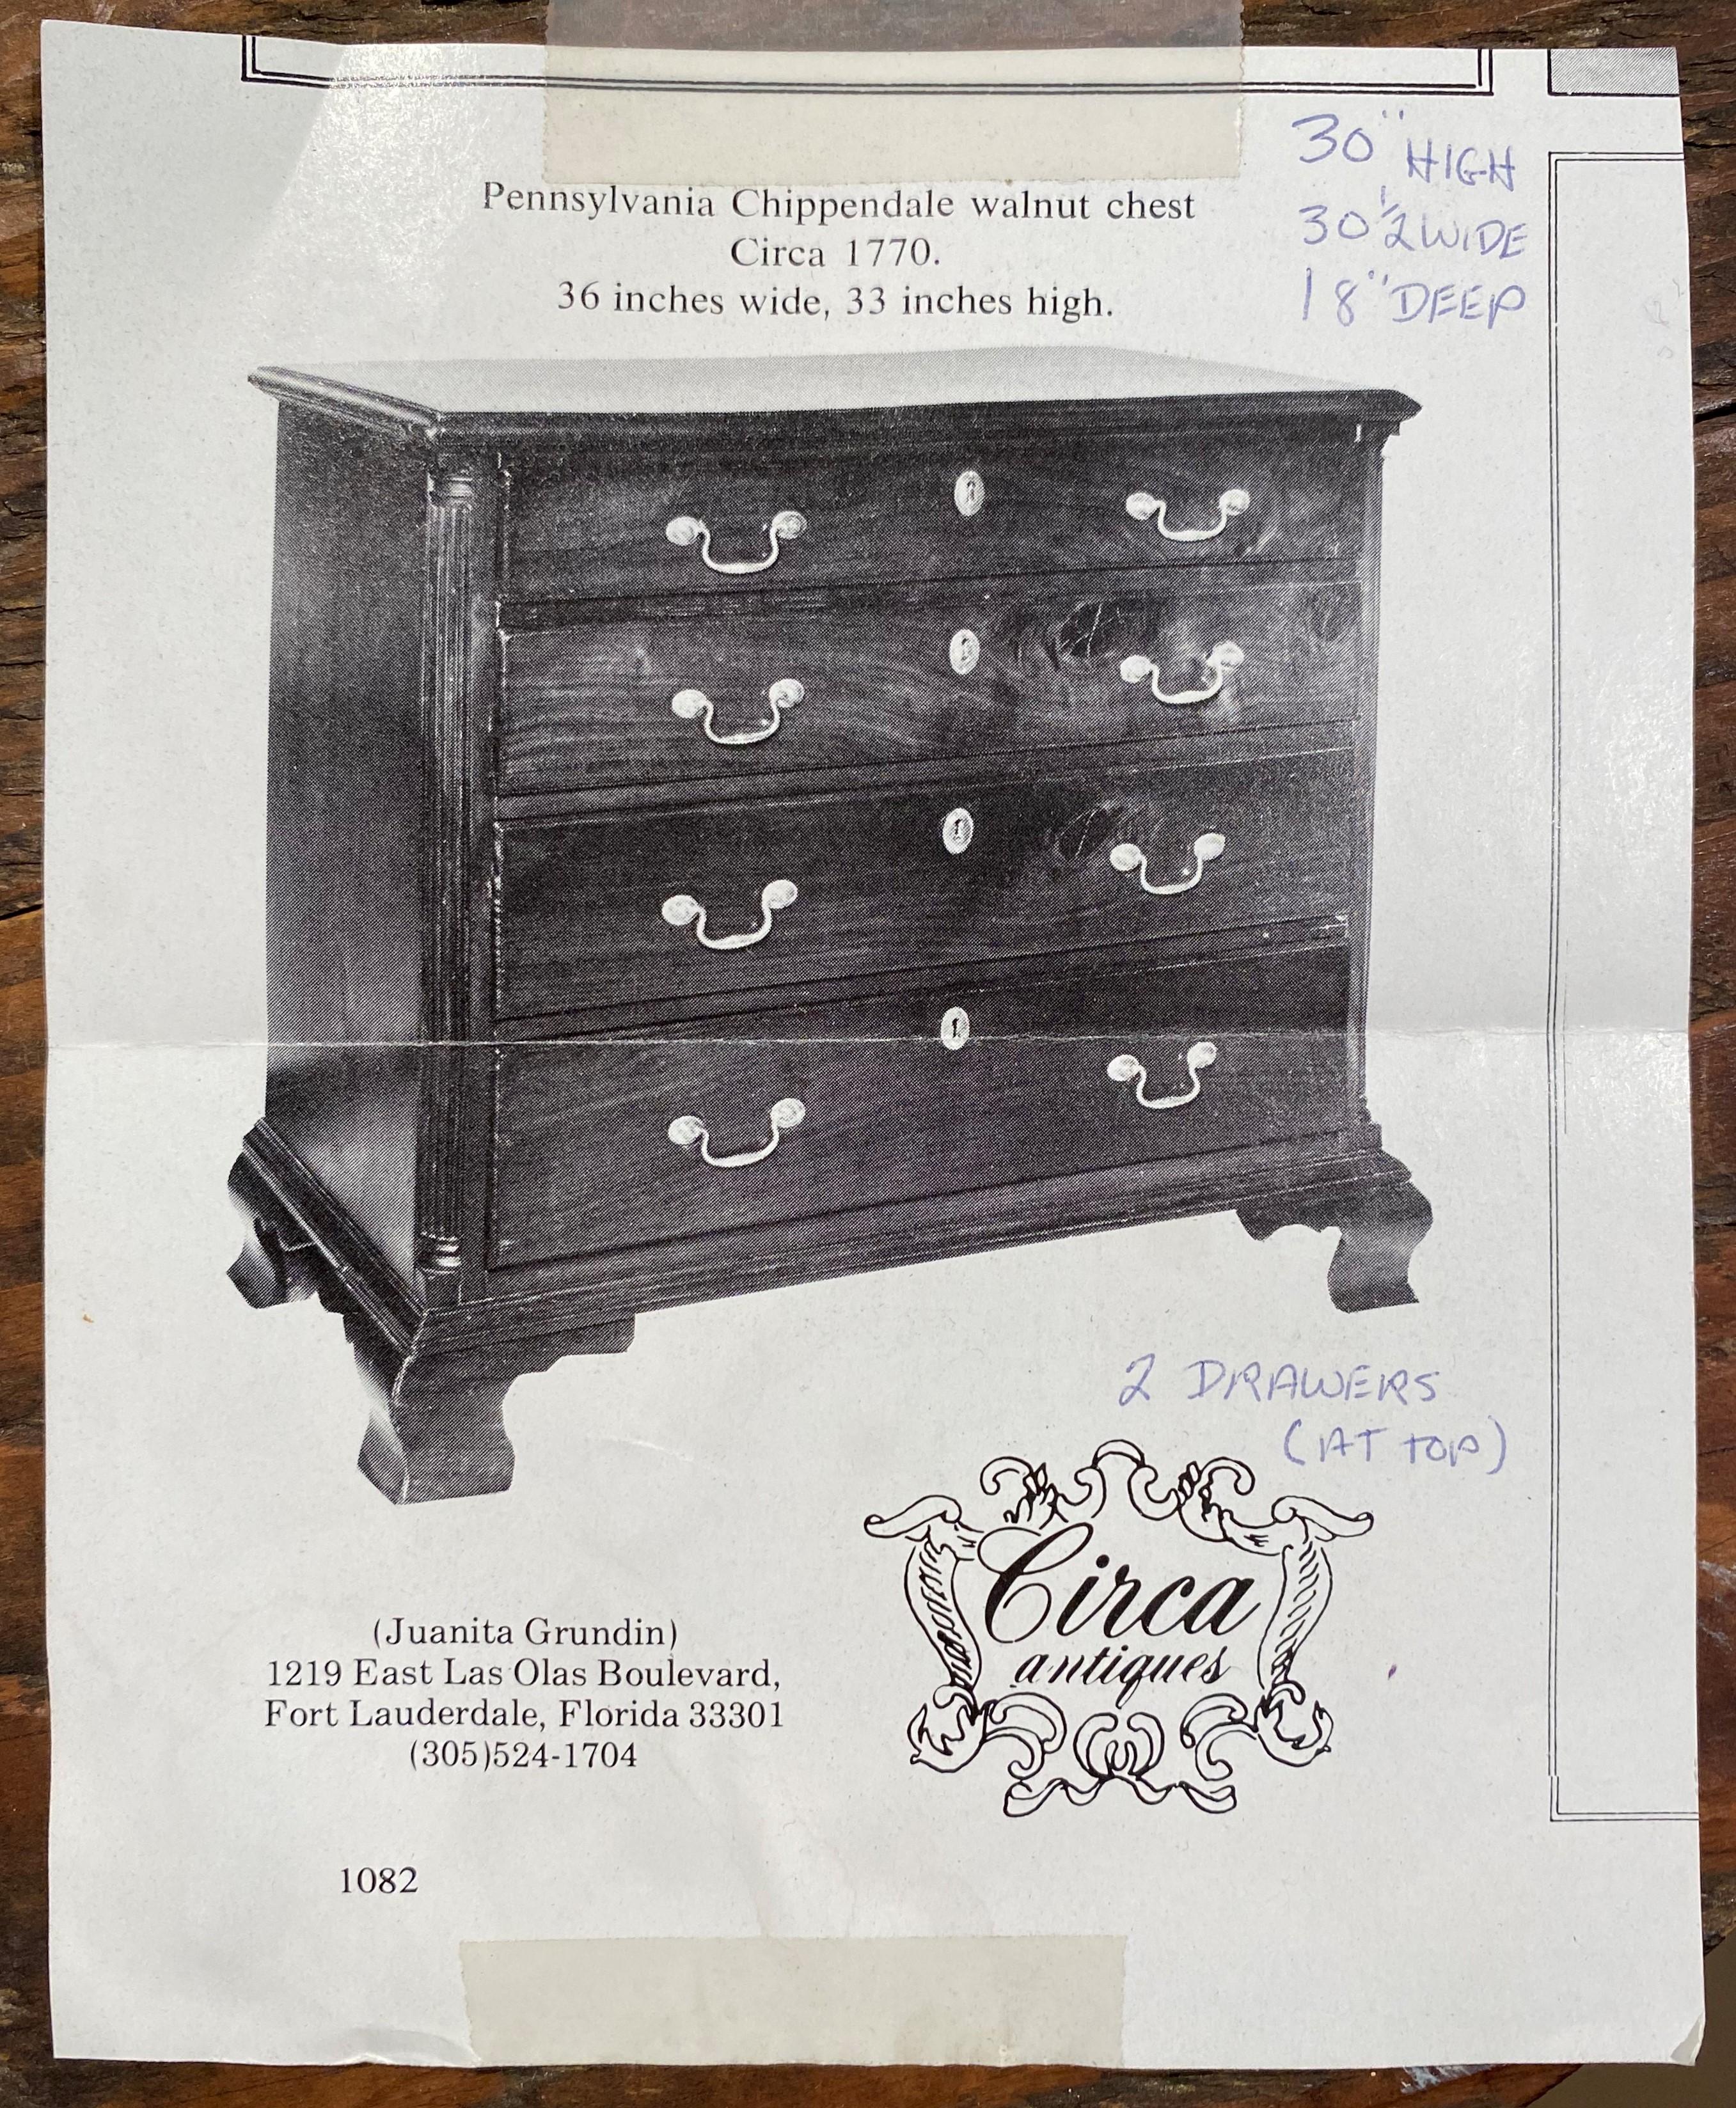 Diminutive Chippendale Mahogany Chest Adapted From a Larger 18th Century Chest 6